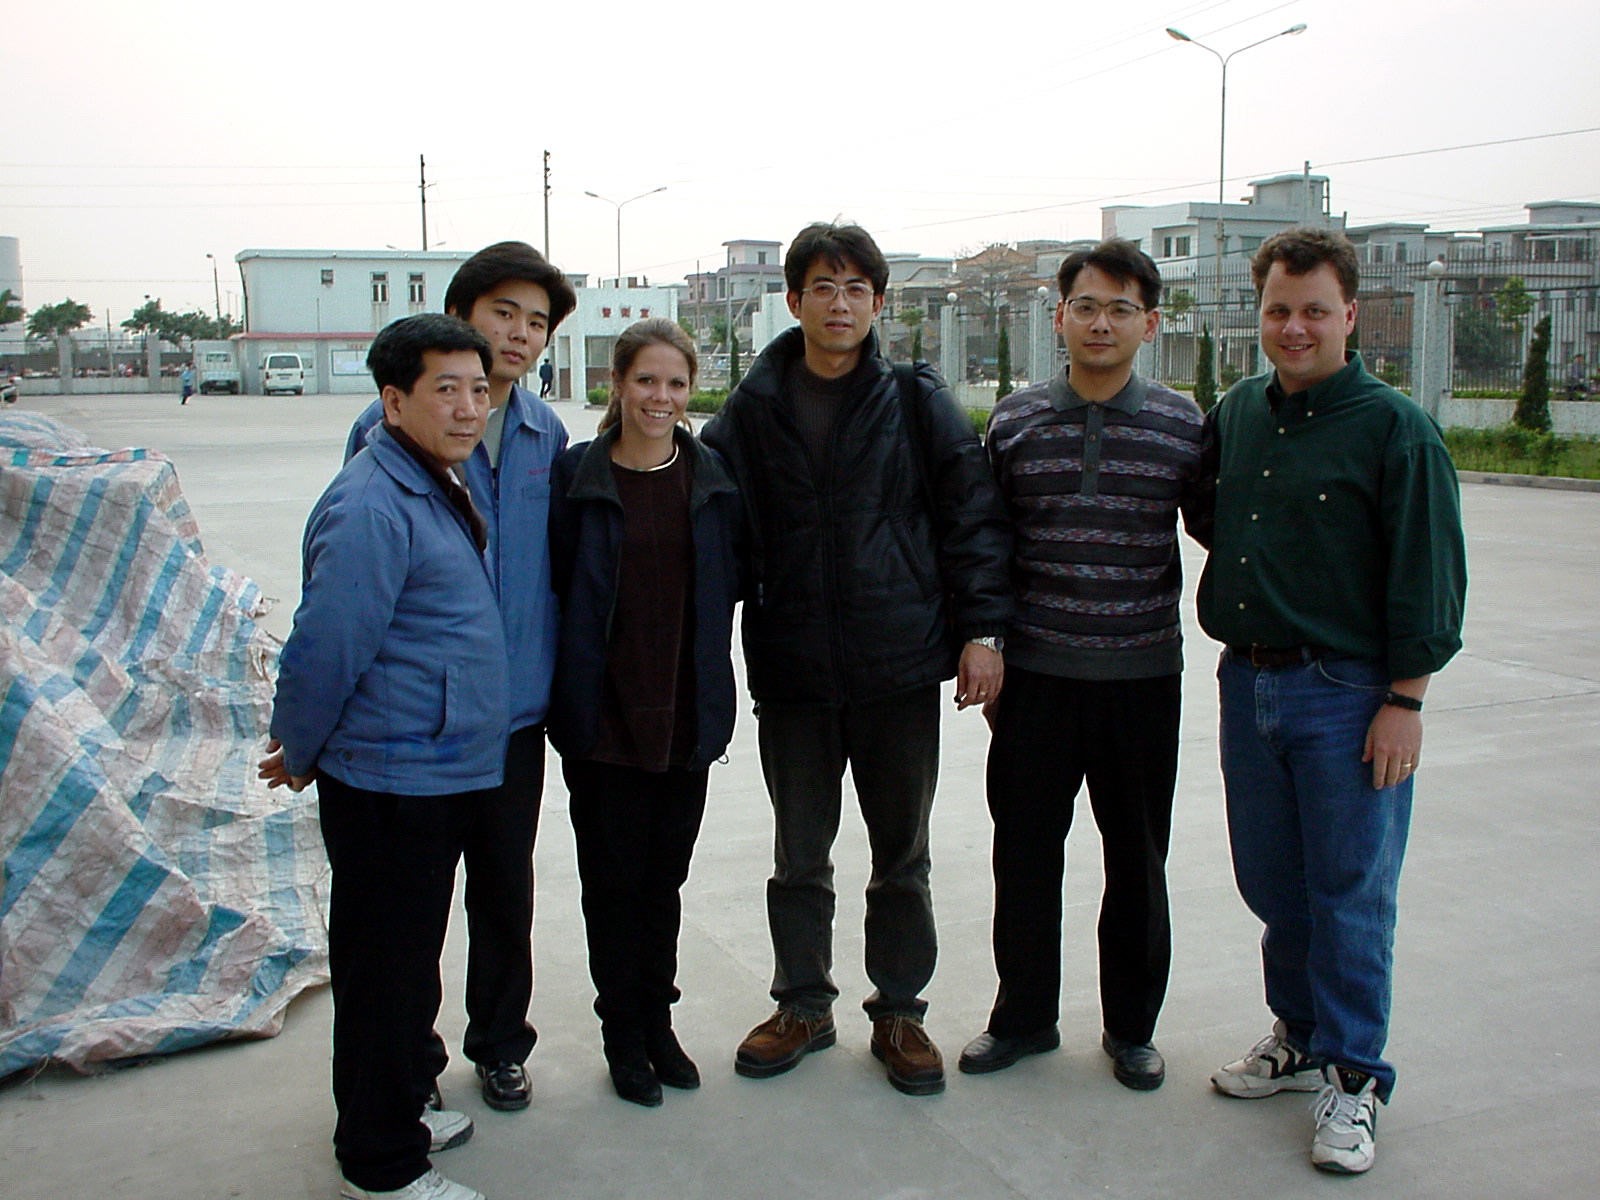 Susan Campbell with colleagues in China during her early career